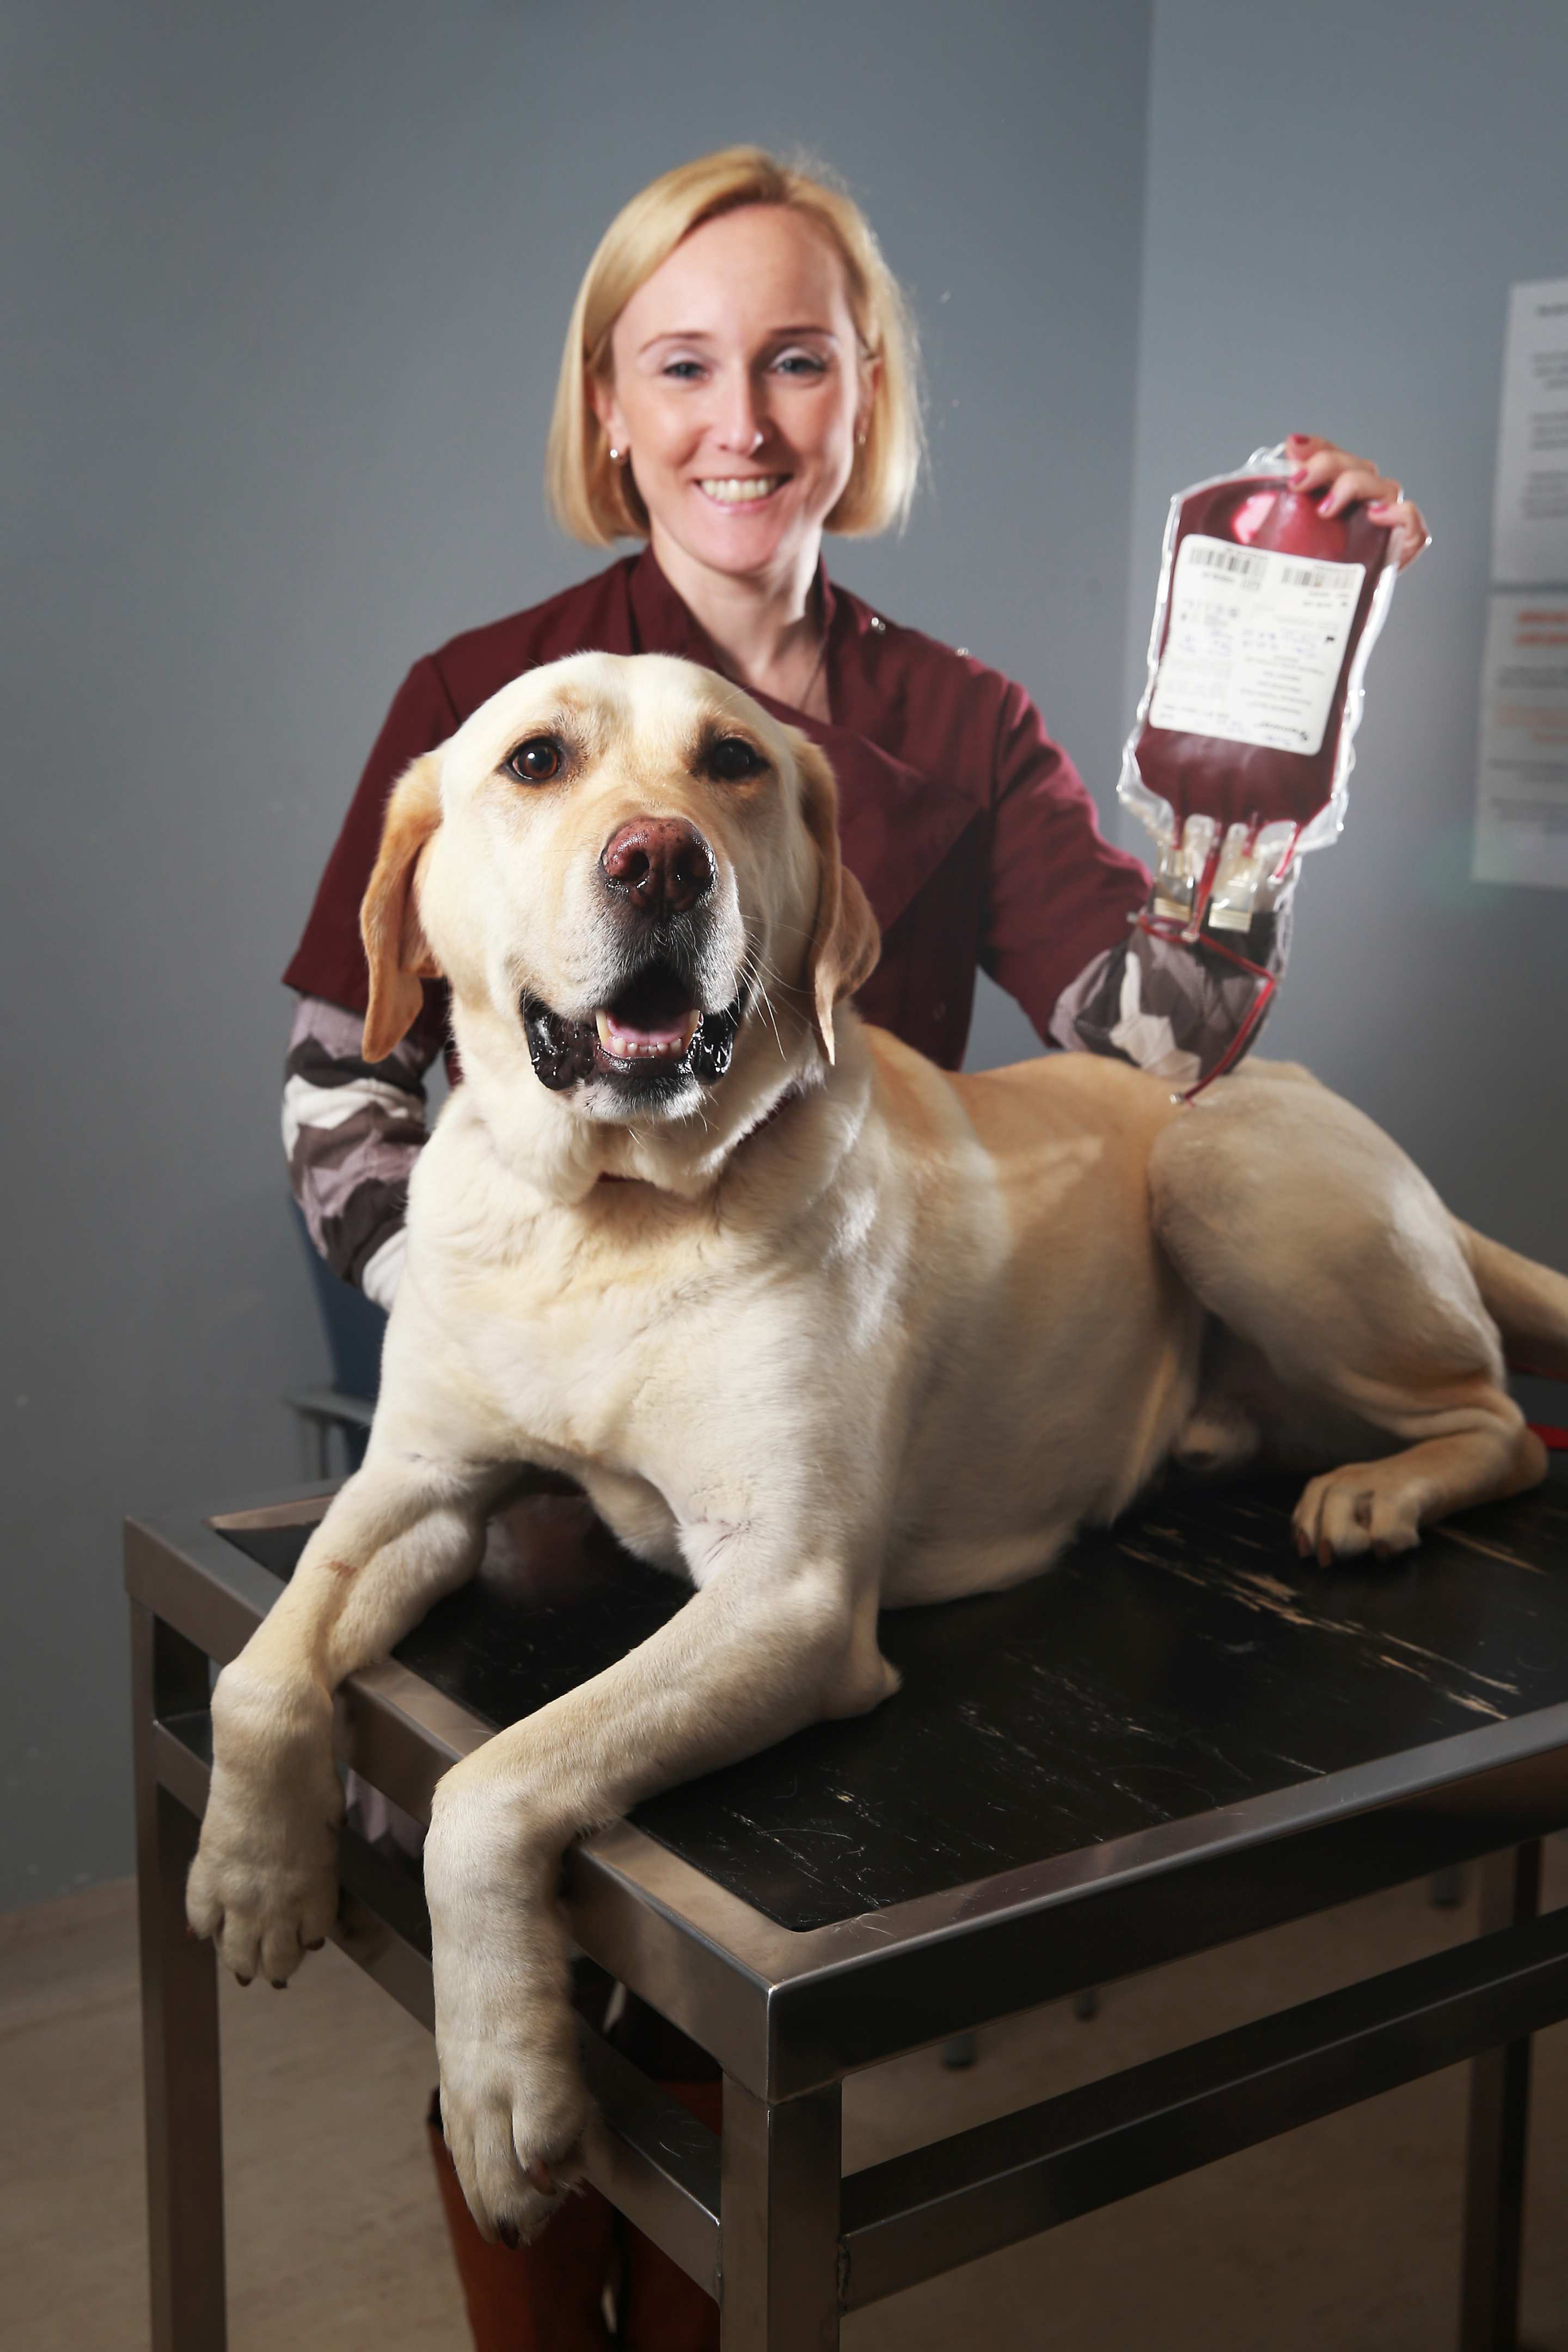 Blood bank opened for dogs to meet demand - The University of Sydney